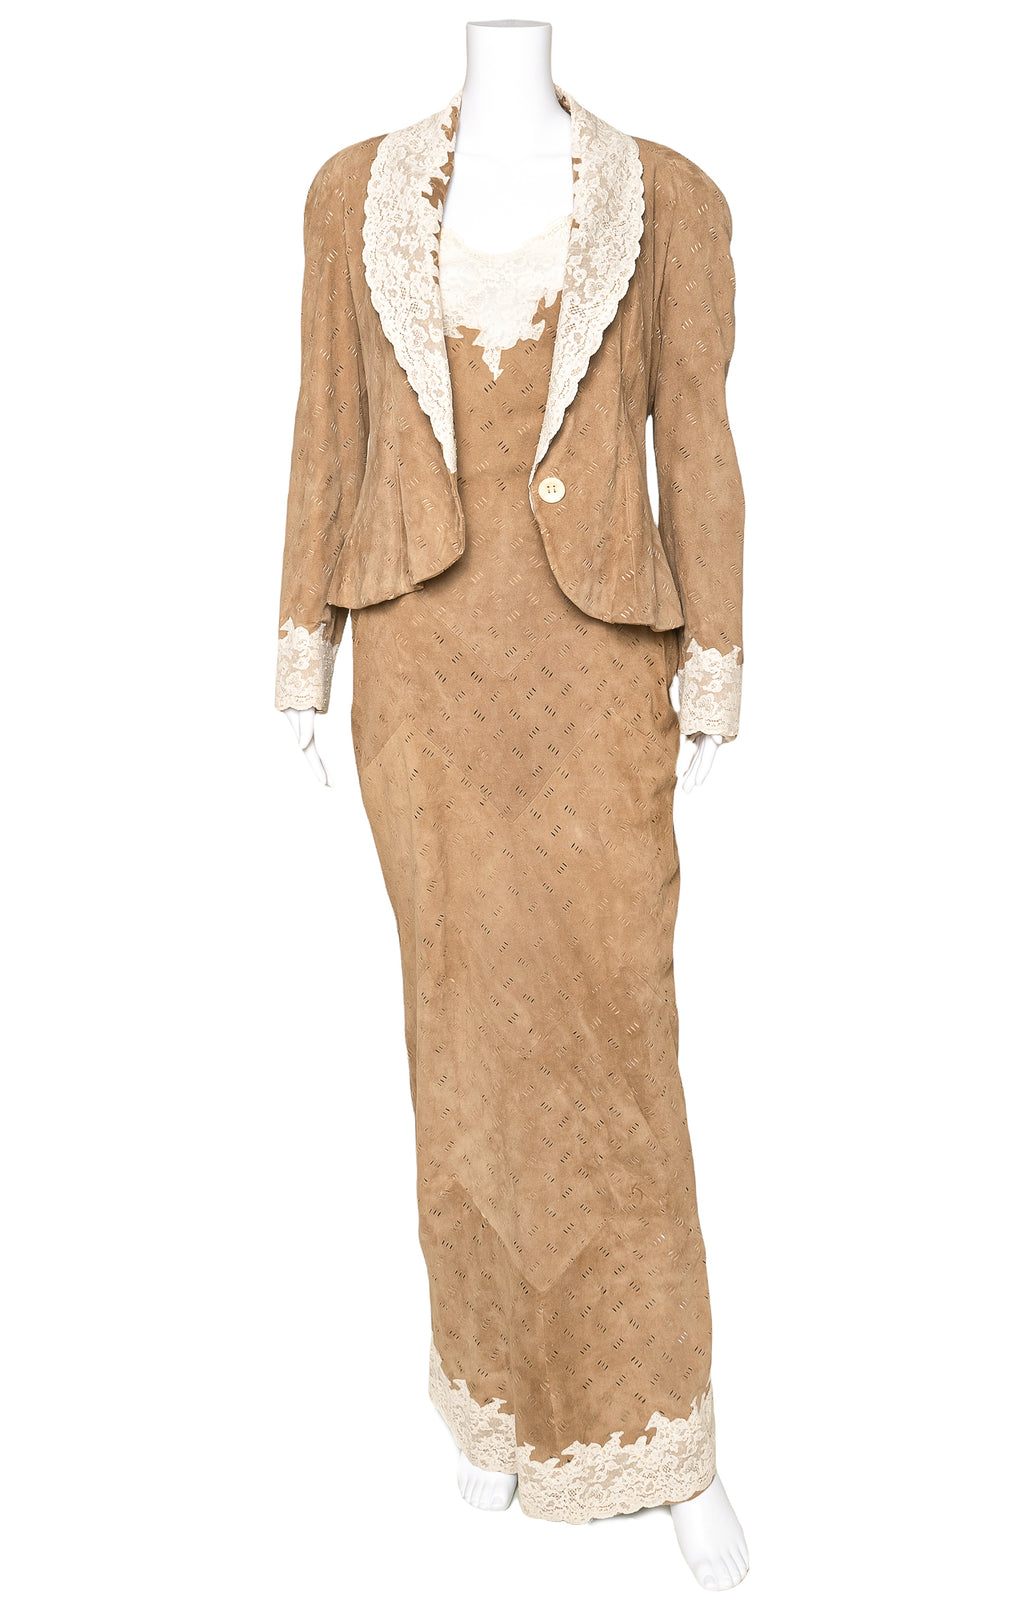 CHRISTIAN DIOR Dress and Jacket Size: US 8